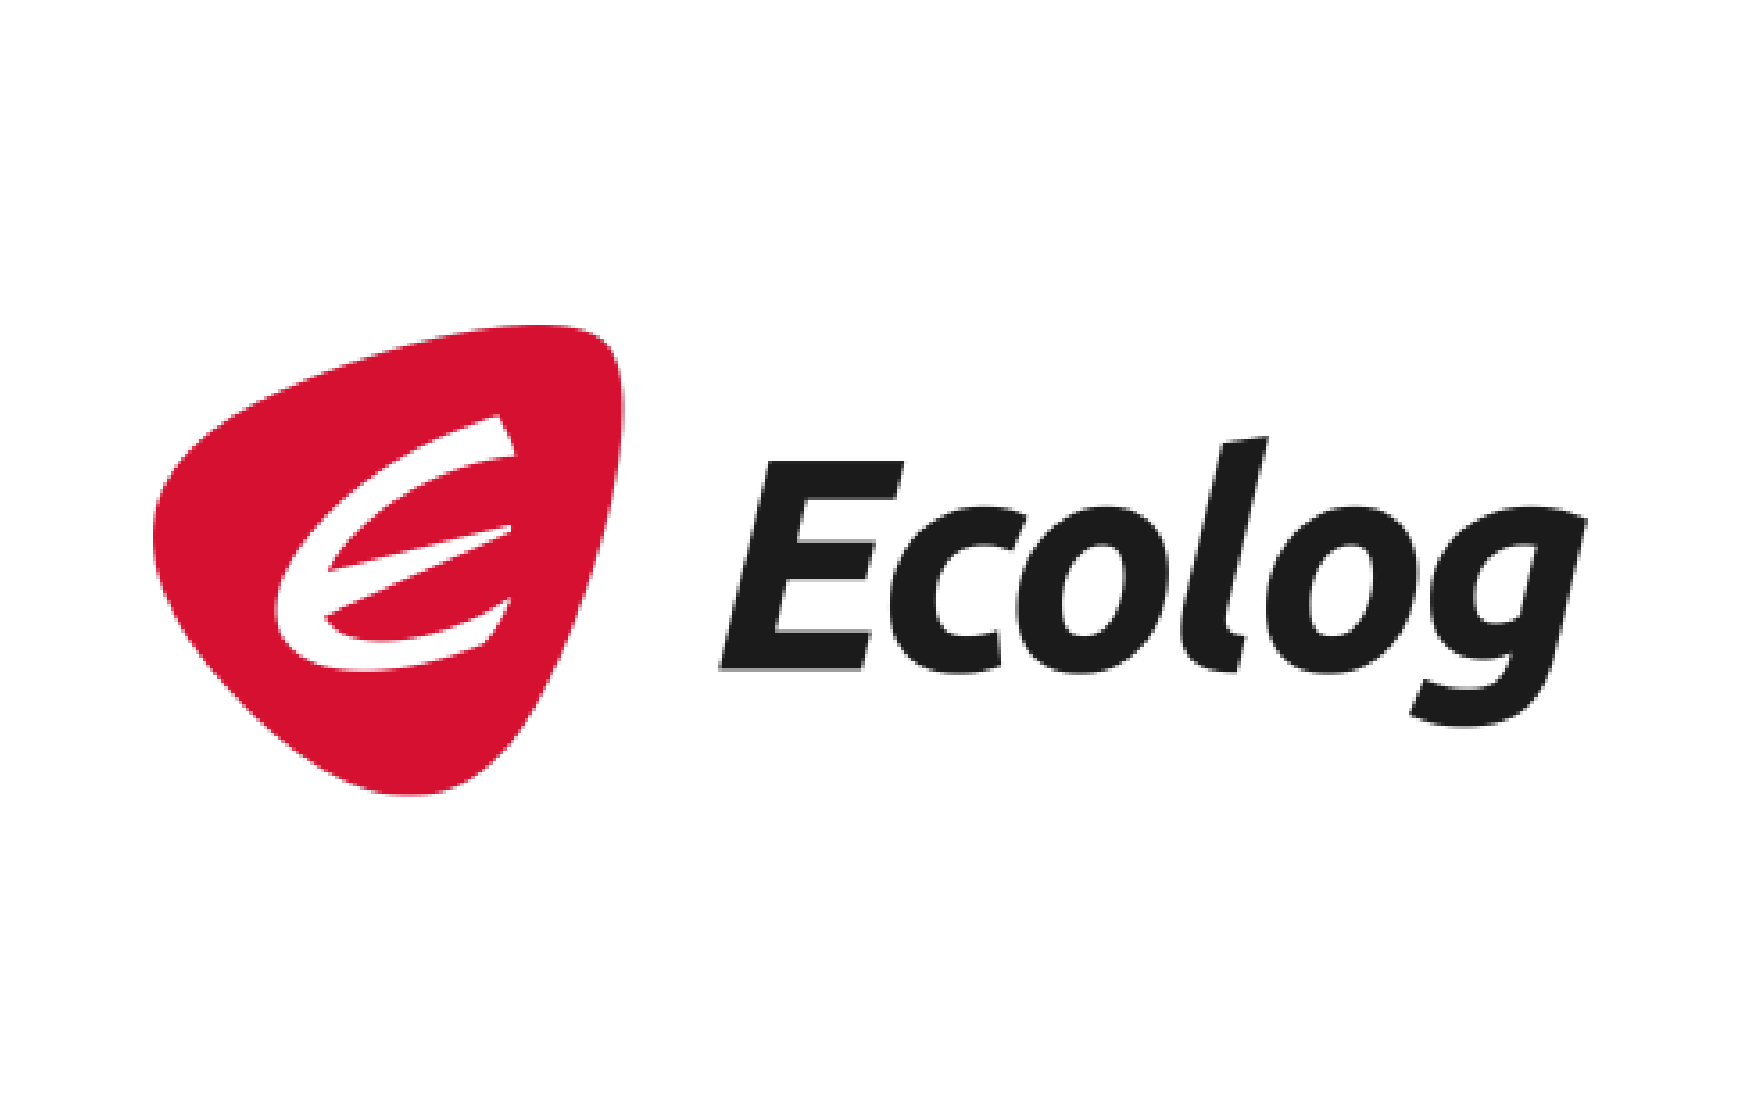 Logo of the company Ecolog who is a client of Precision Talent Solutions.